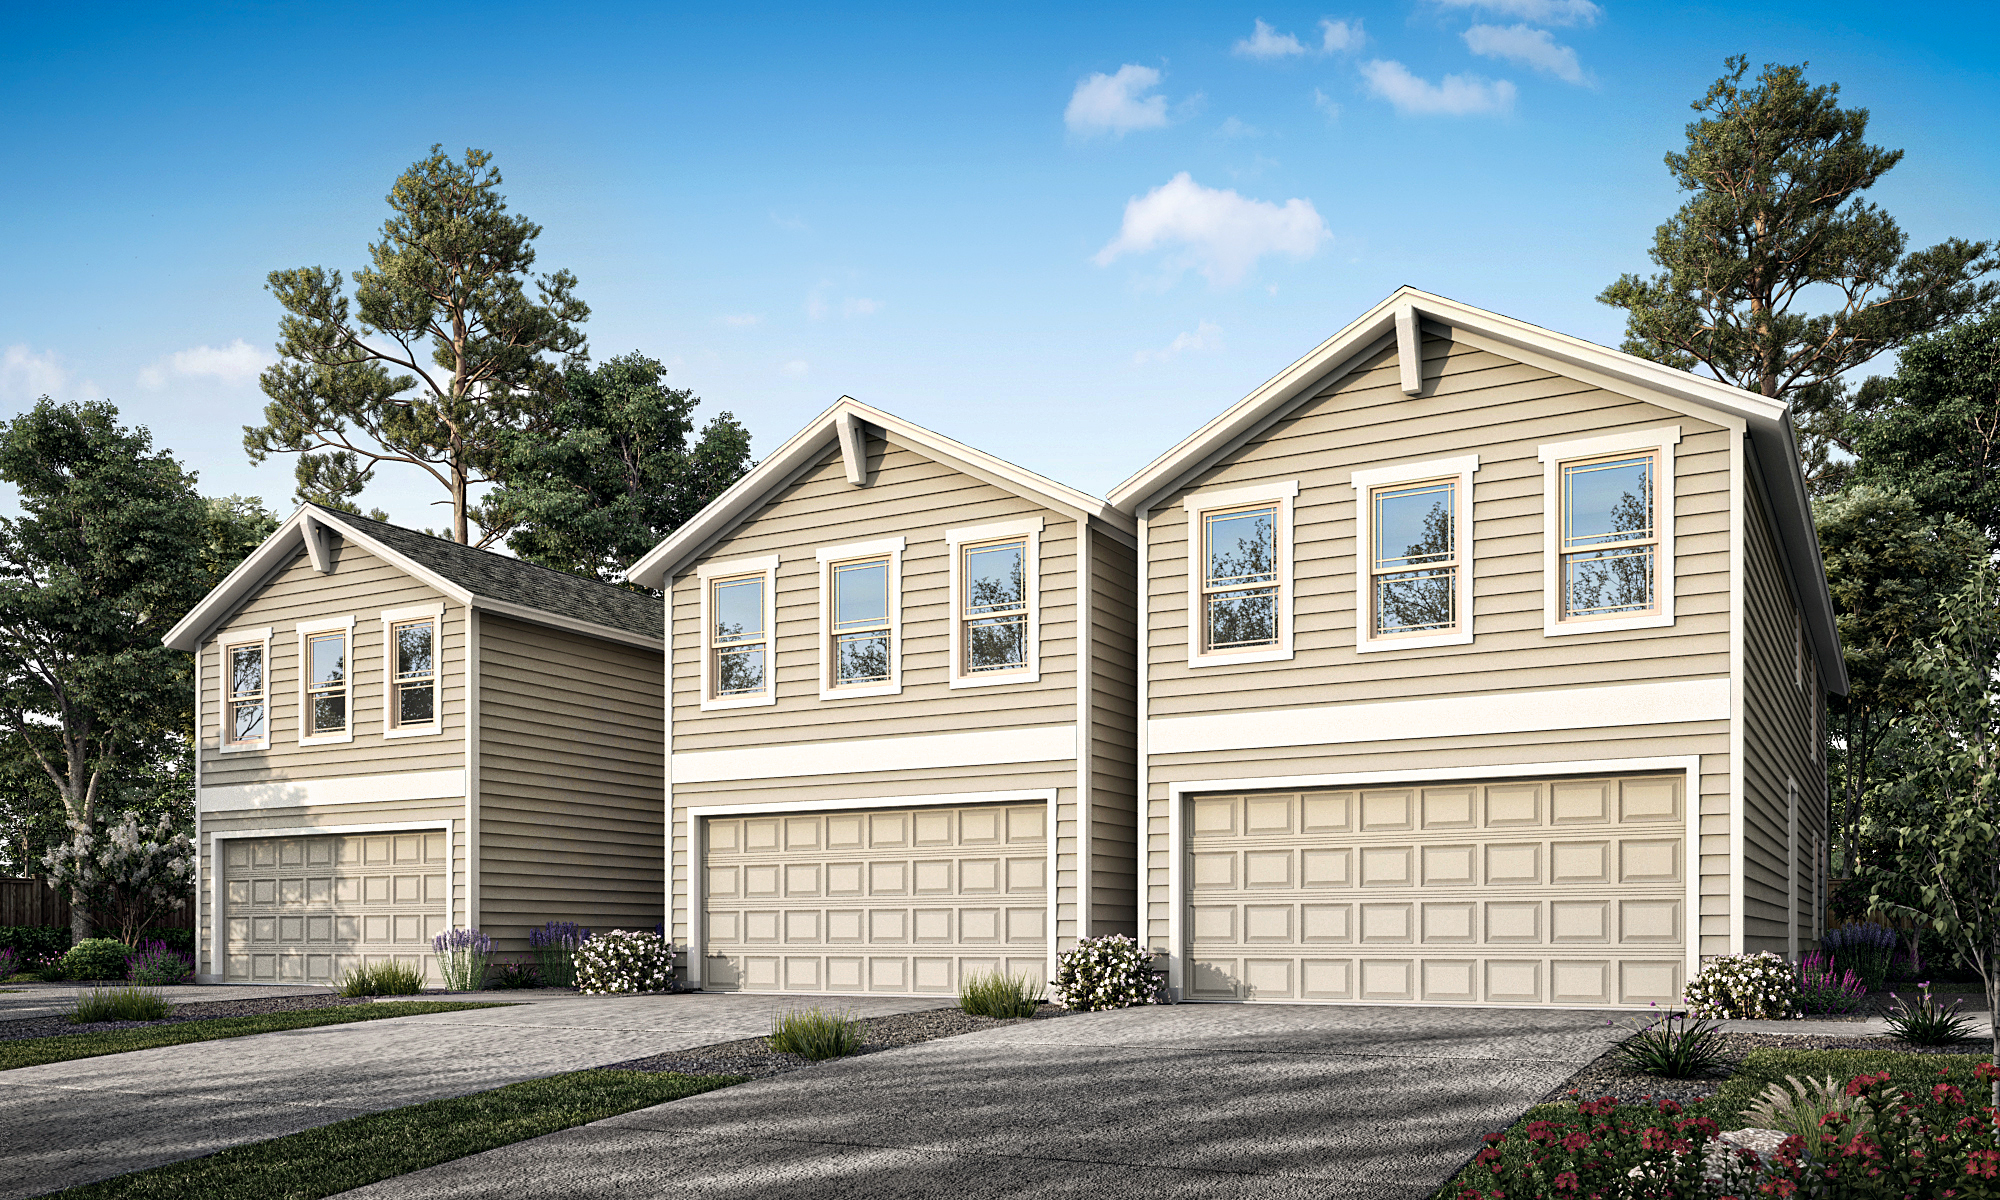 Front elevation view of the Censeo Homes 1713 model